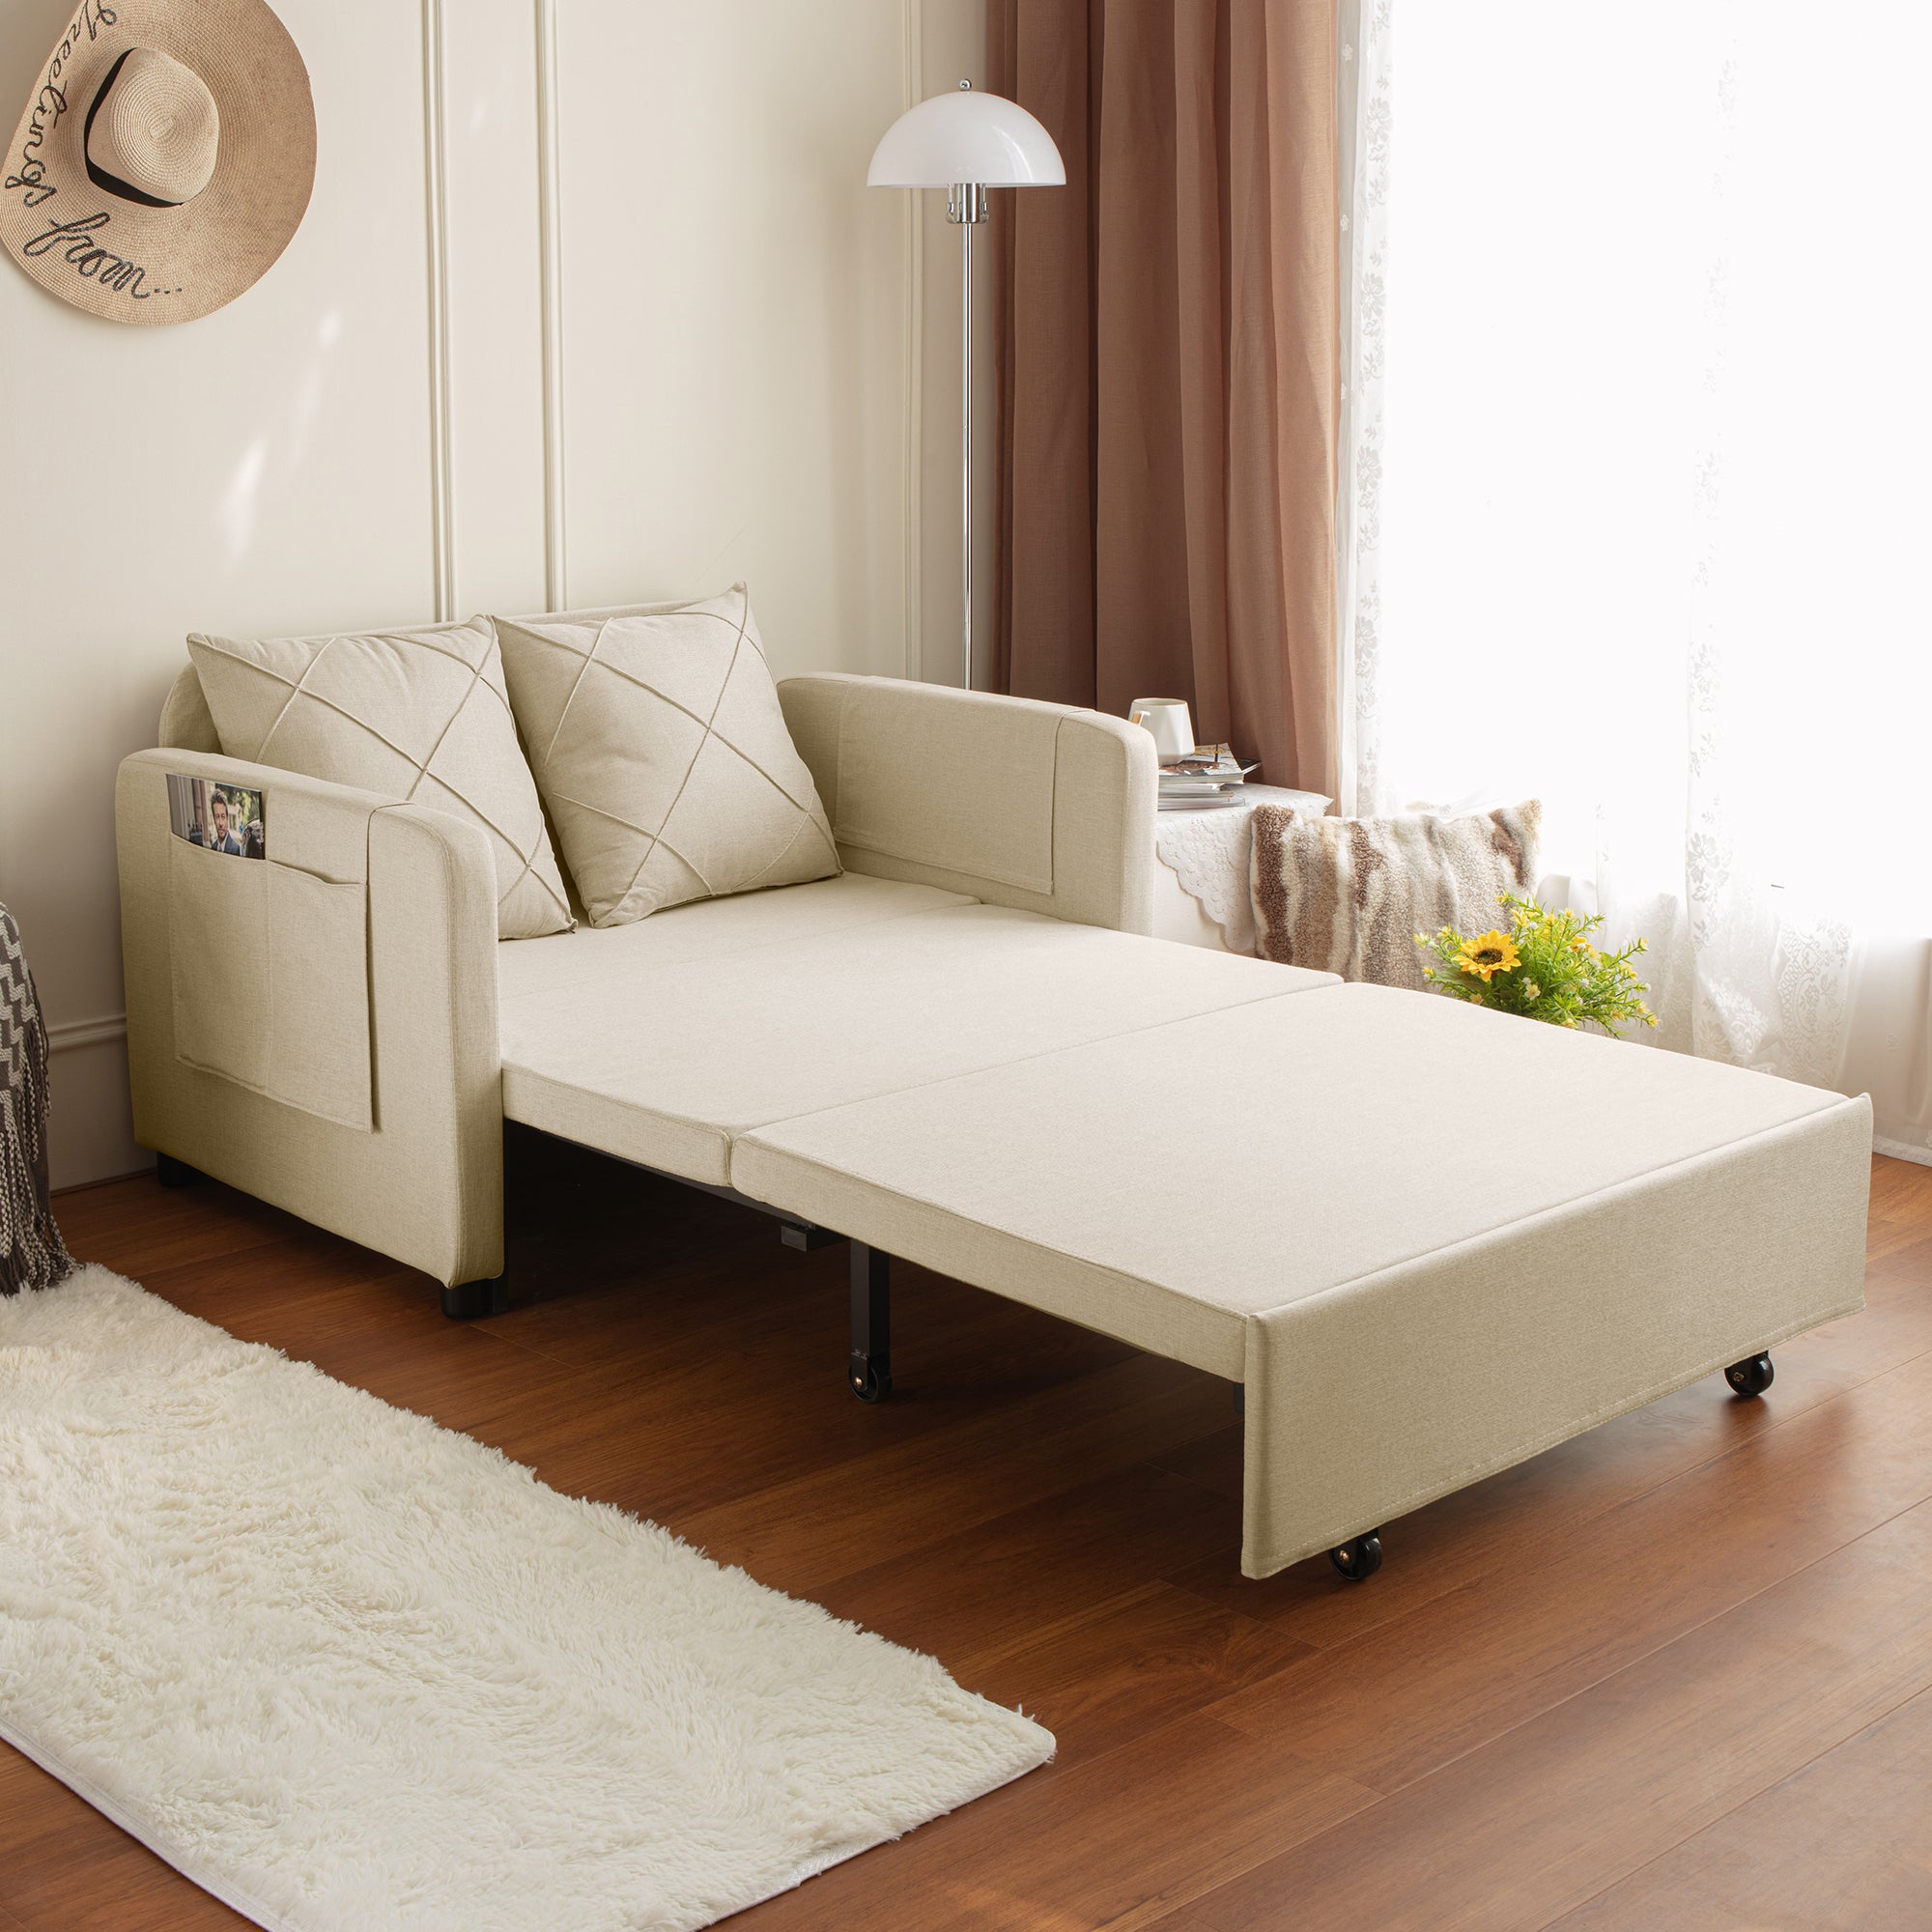 VIDEO provided Modern Love Seat Futon Sofa Bed with beige-foam